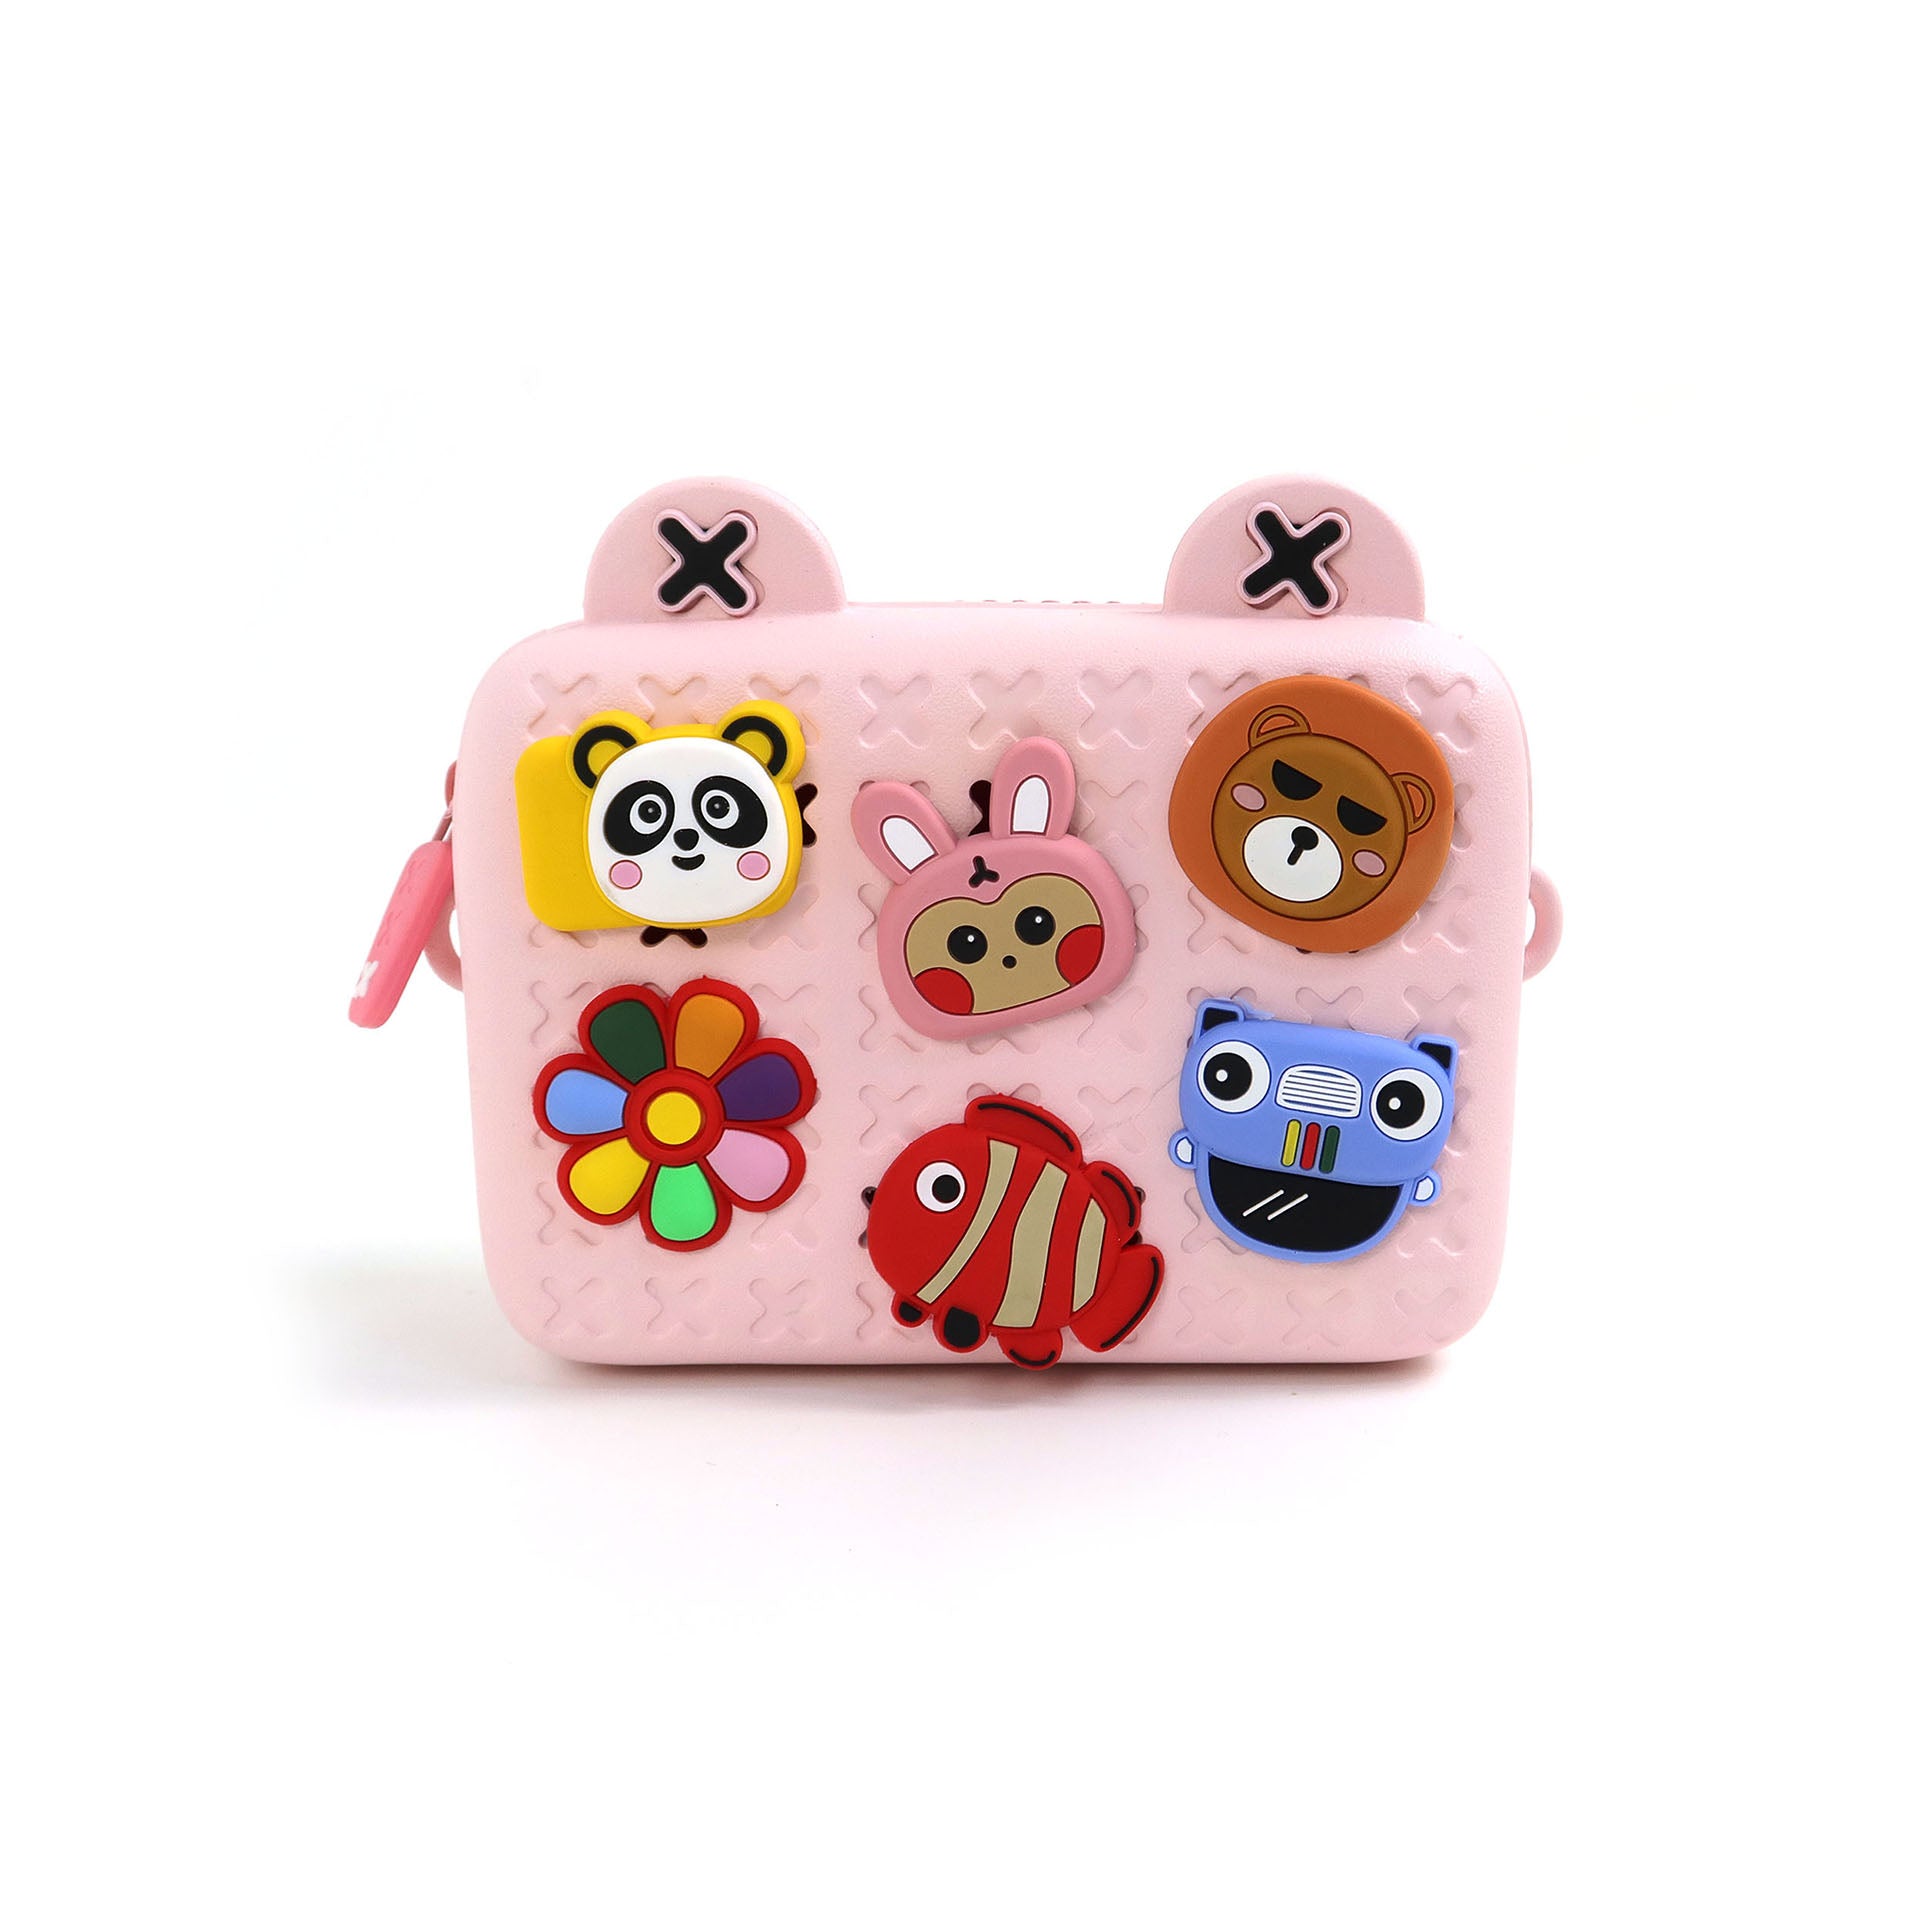 myFirst Camera Insta 2 Bag - Oaxis - The Official Maker of InkCase and the brand owner of myFirst - A brand new collection for kids